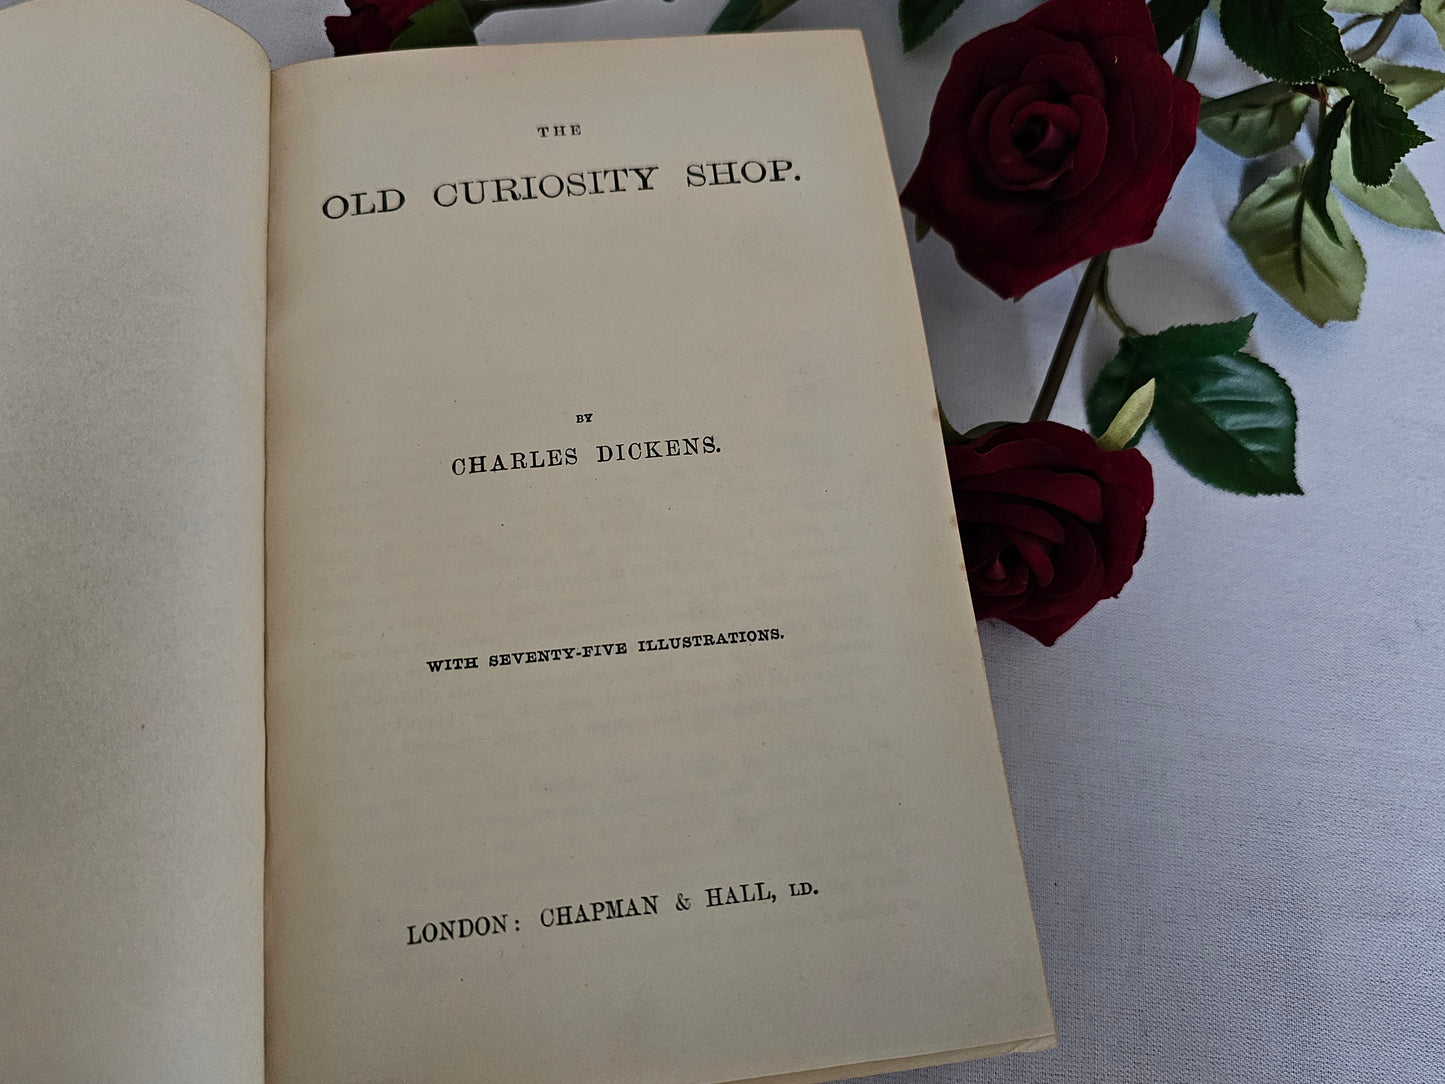 c1885 The Old Curiosity Shop by Charles Dickens / Chapman & Hall, London / 75 Illustrations / Fine Leather Binding / In Good Condition